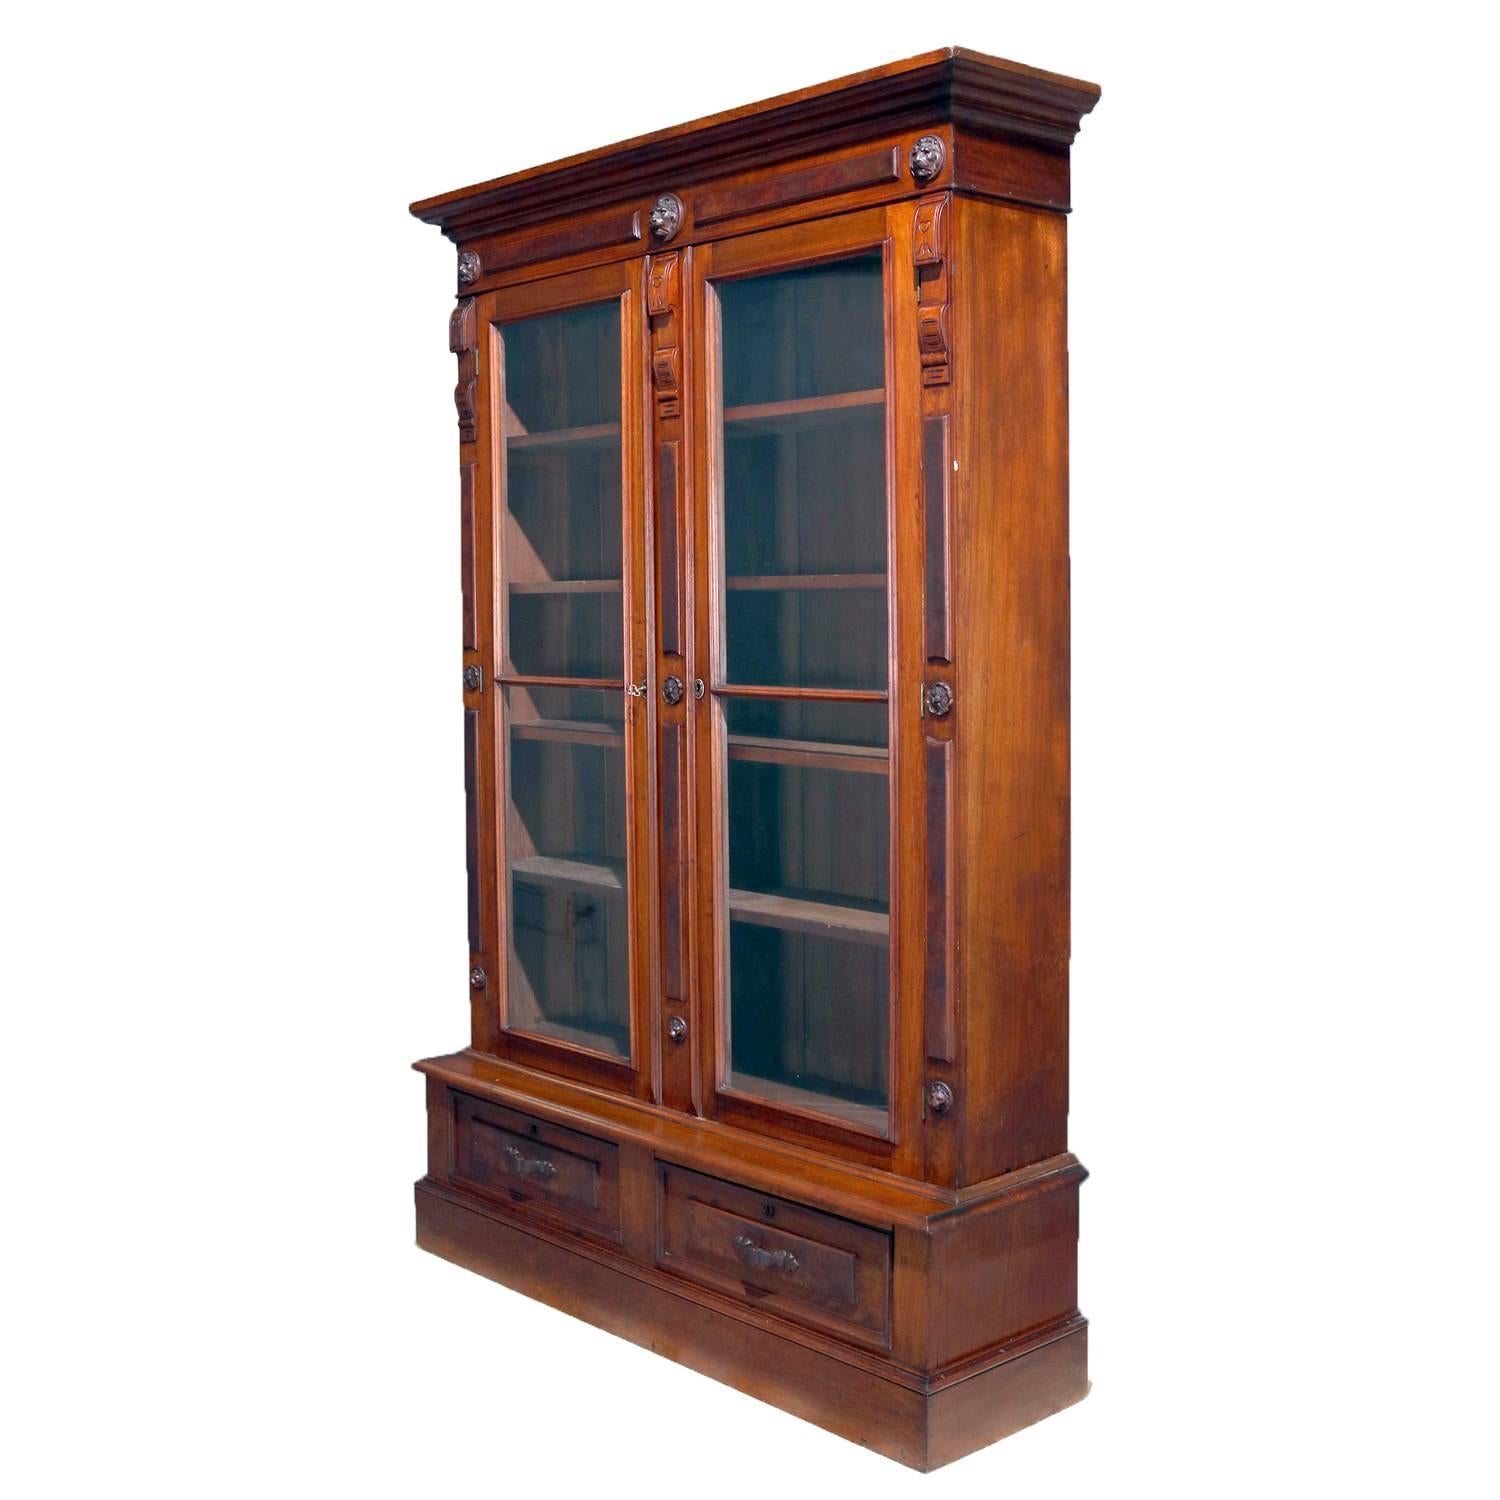 Classical walnut bookcase features case with burl and carved lion head reserves and two glass-front doors opening to reveal adjustable shelf interior and over two lower drawers, locking and with key, circa 1890.

Measures: 85